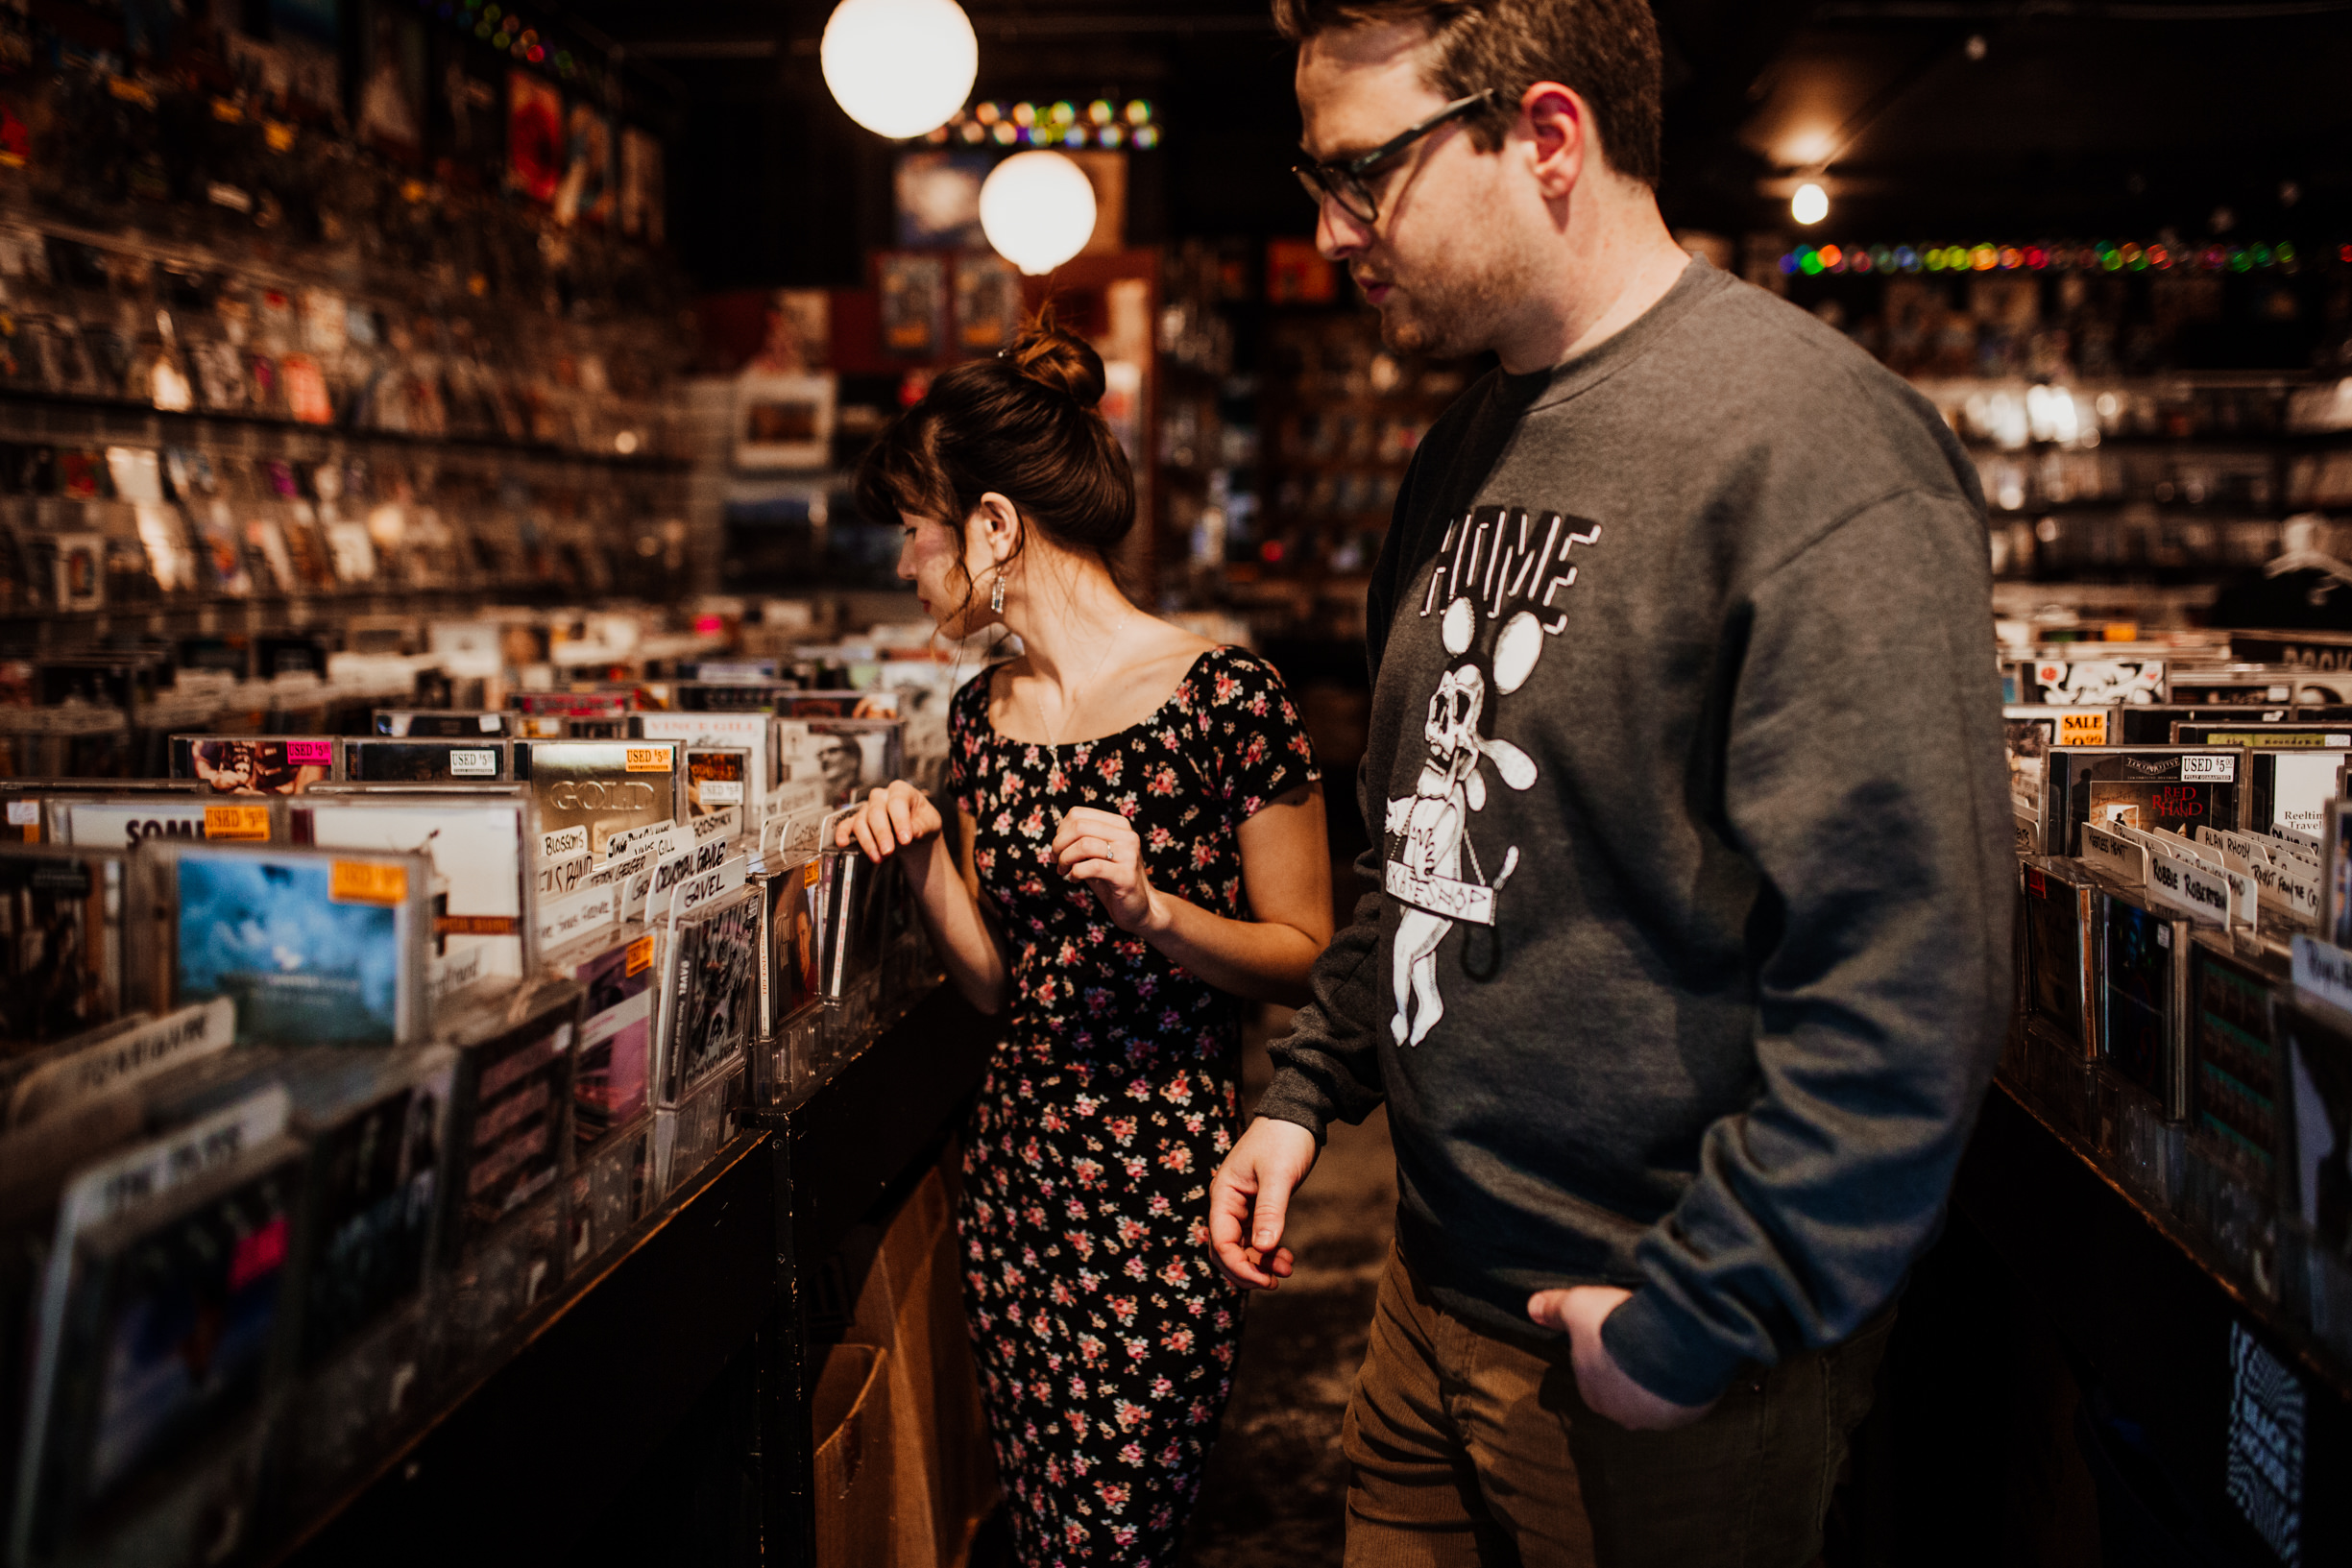 louisville-engagement-photographer-record-store-in-home-session-crystal-ludwick-photo (47 of 53).jpg